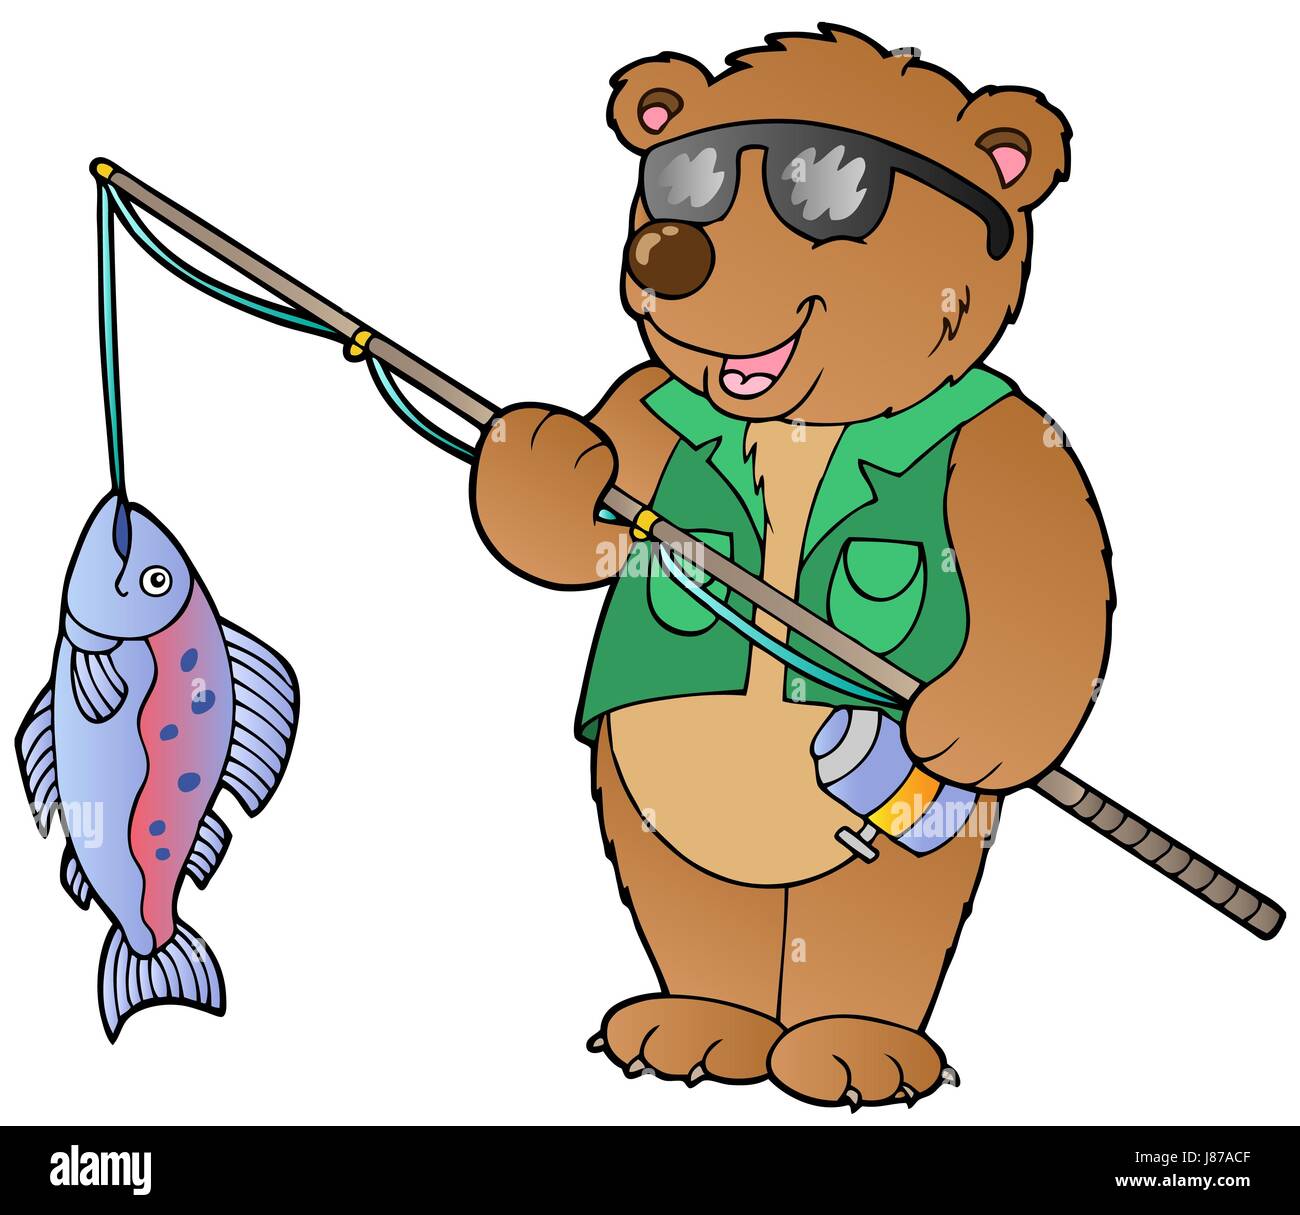 Kids drawing fishing rod Cut Out Stock Images & Pictures - Alamy